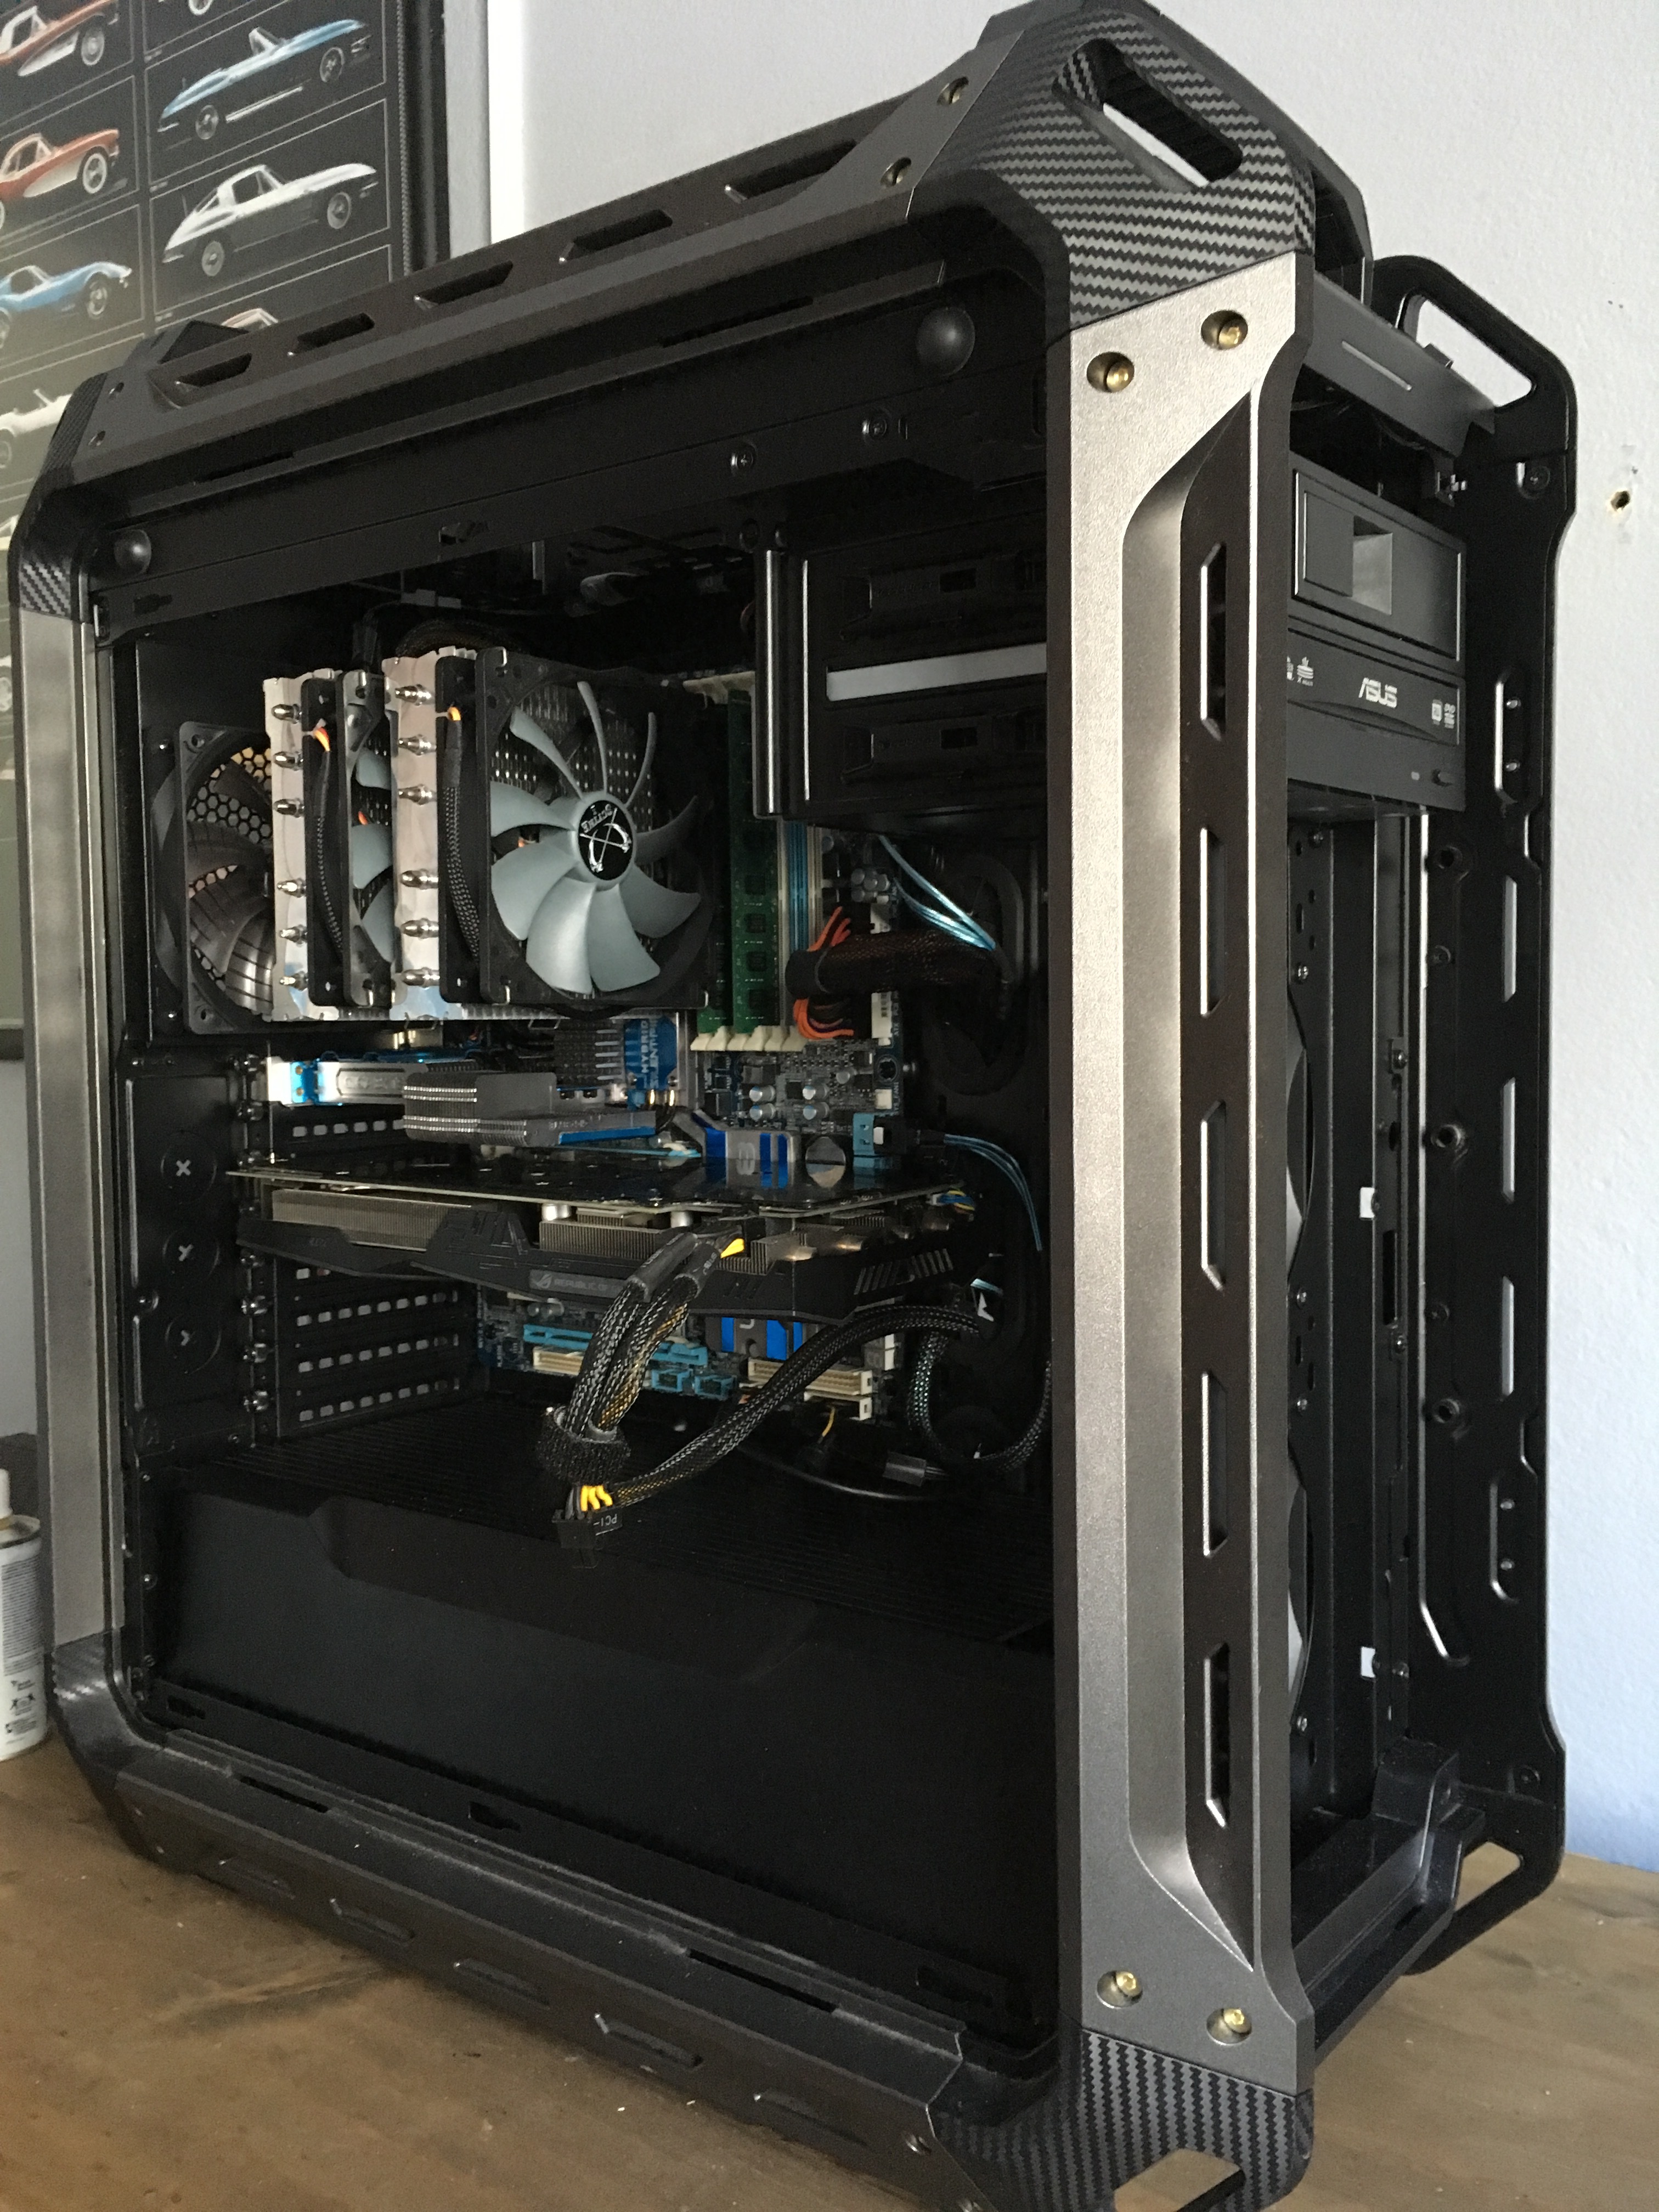 Recommended Sound Dampening for PC Case - Other Hardware - Level1Techs  Forums